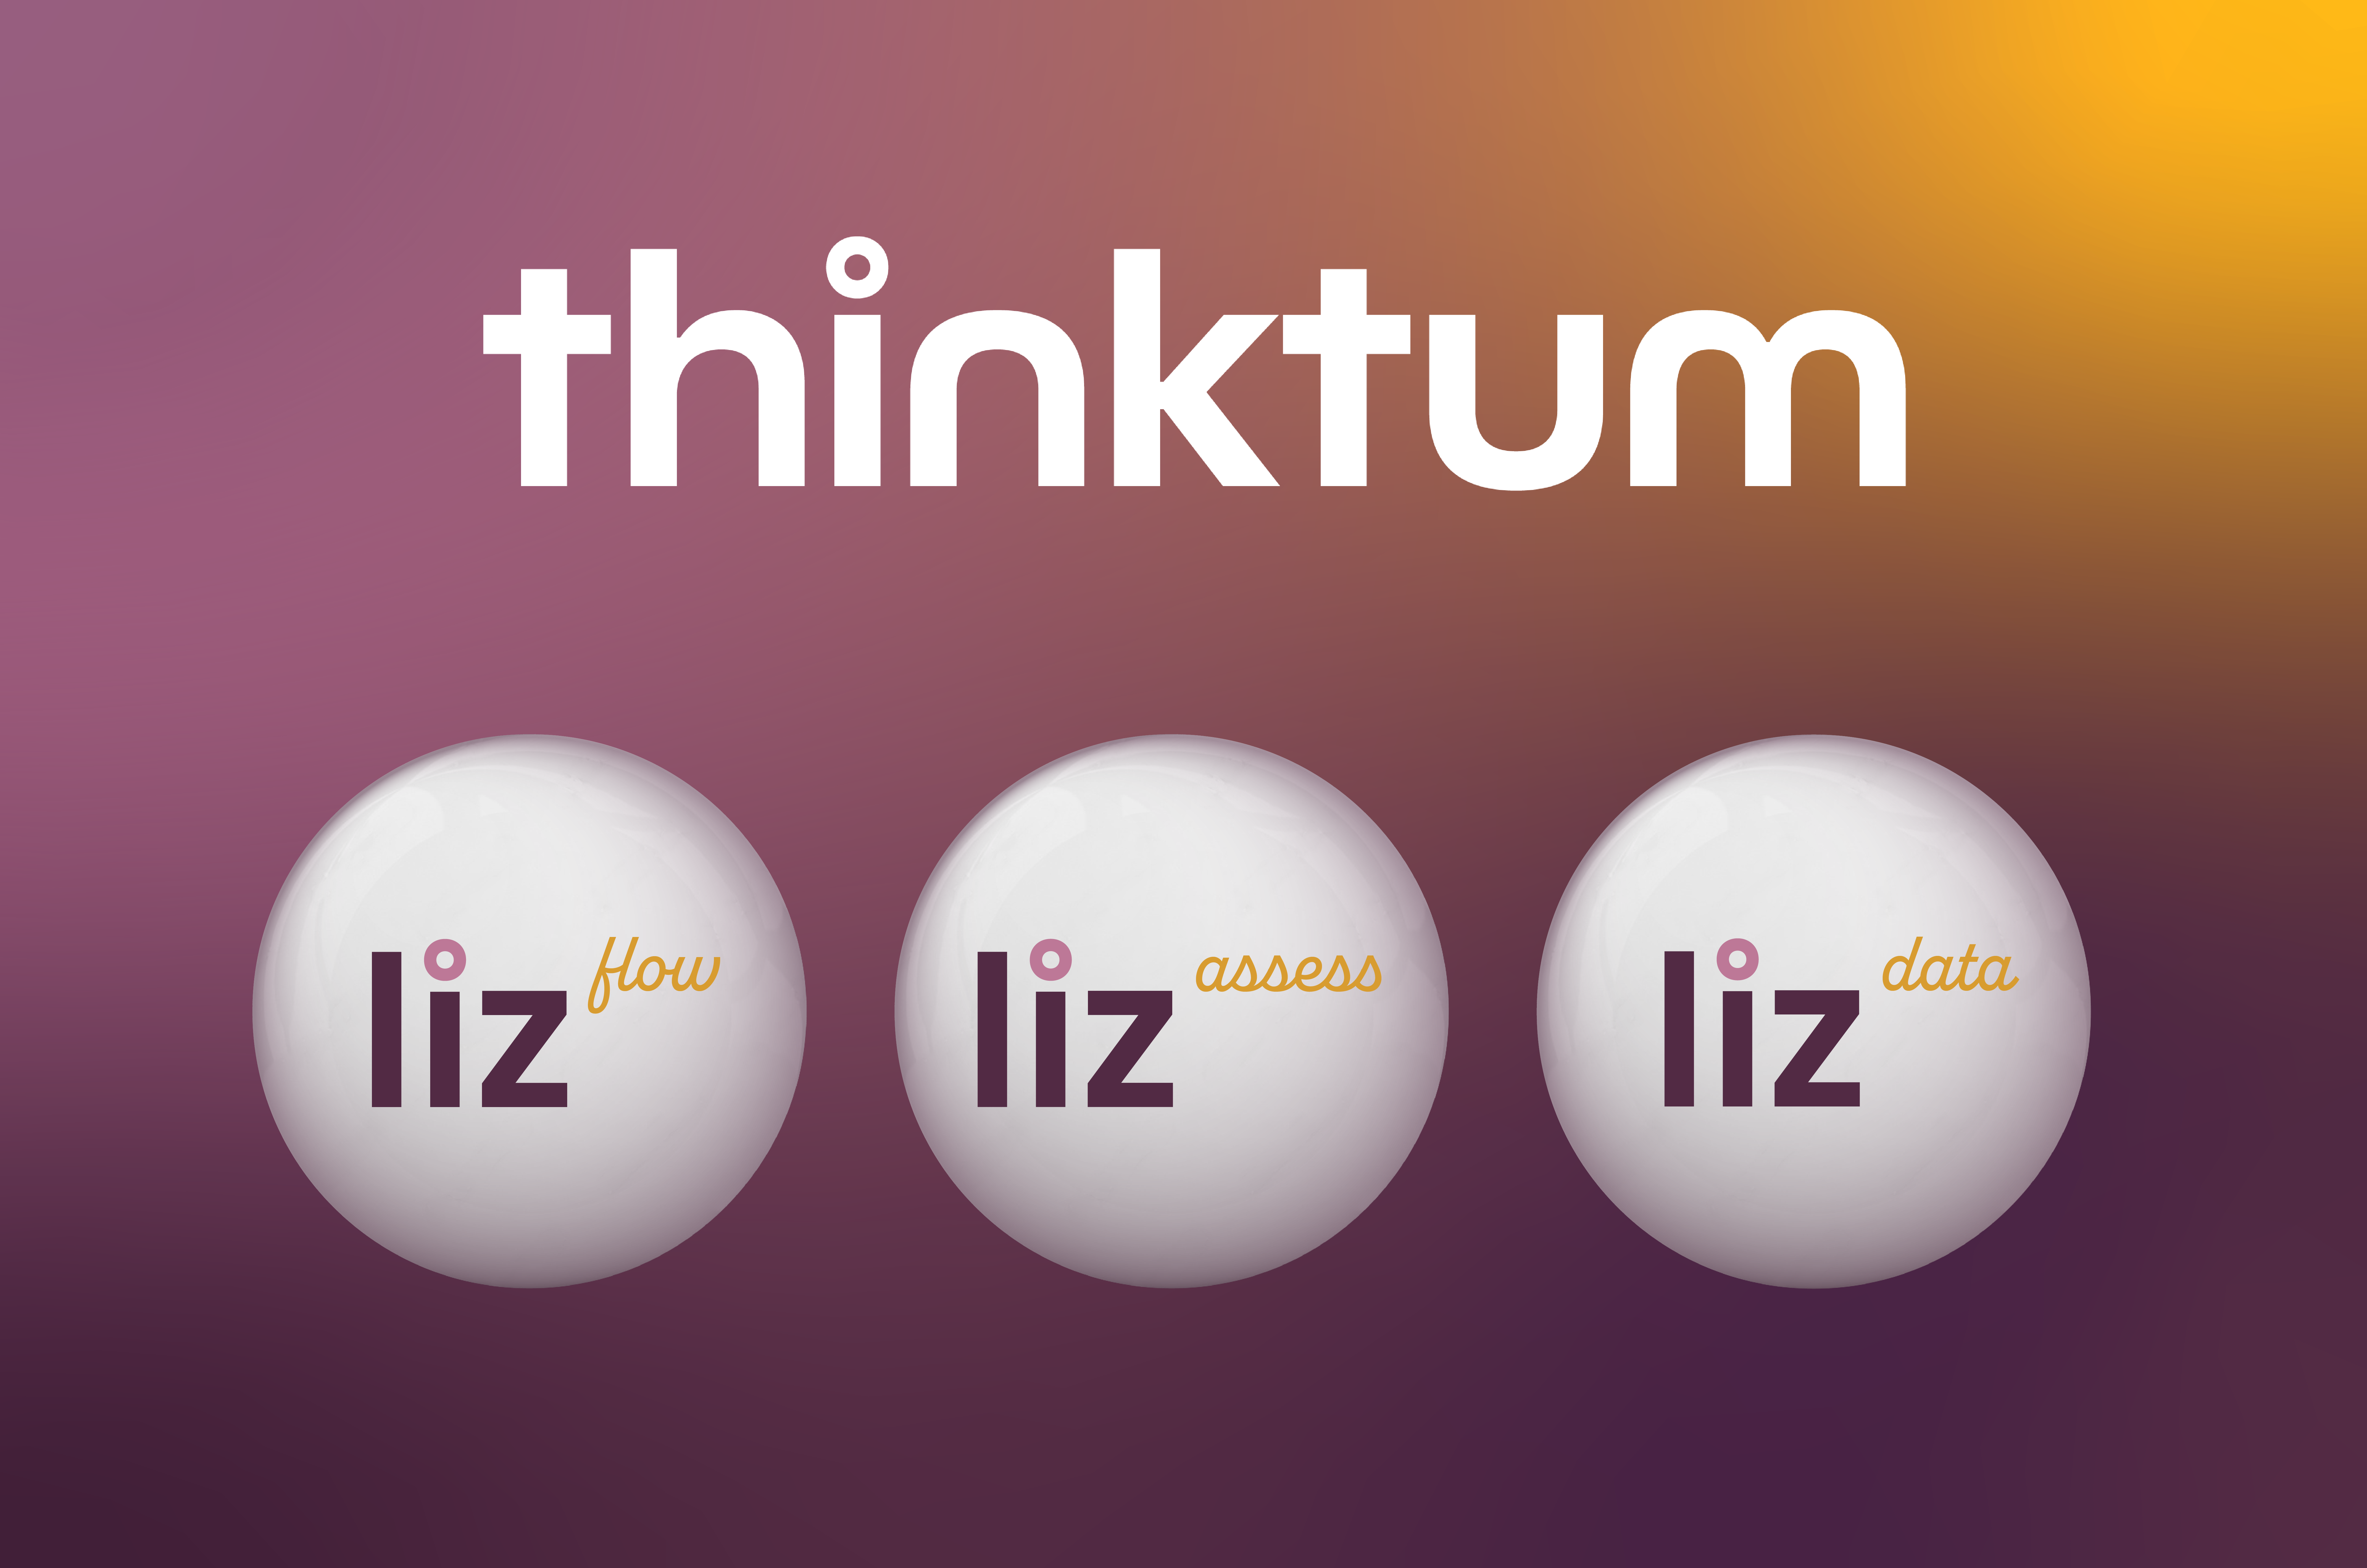 The thinktum wordmark is shown with three balls within: liz flow, liz assess, and liz data on a purple background.